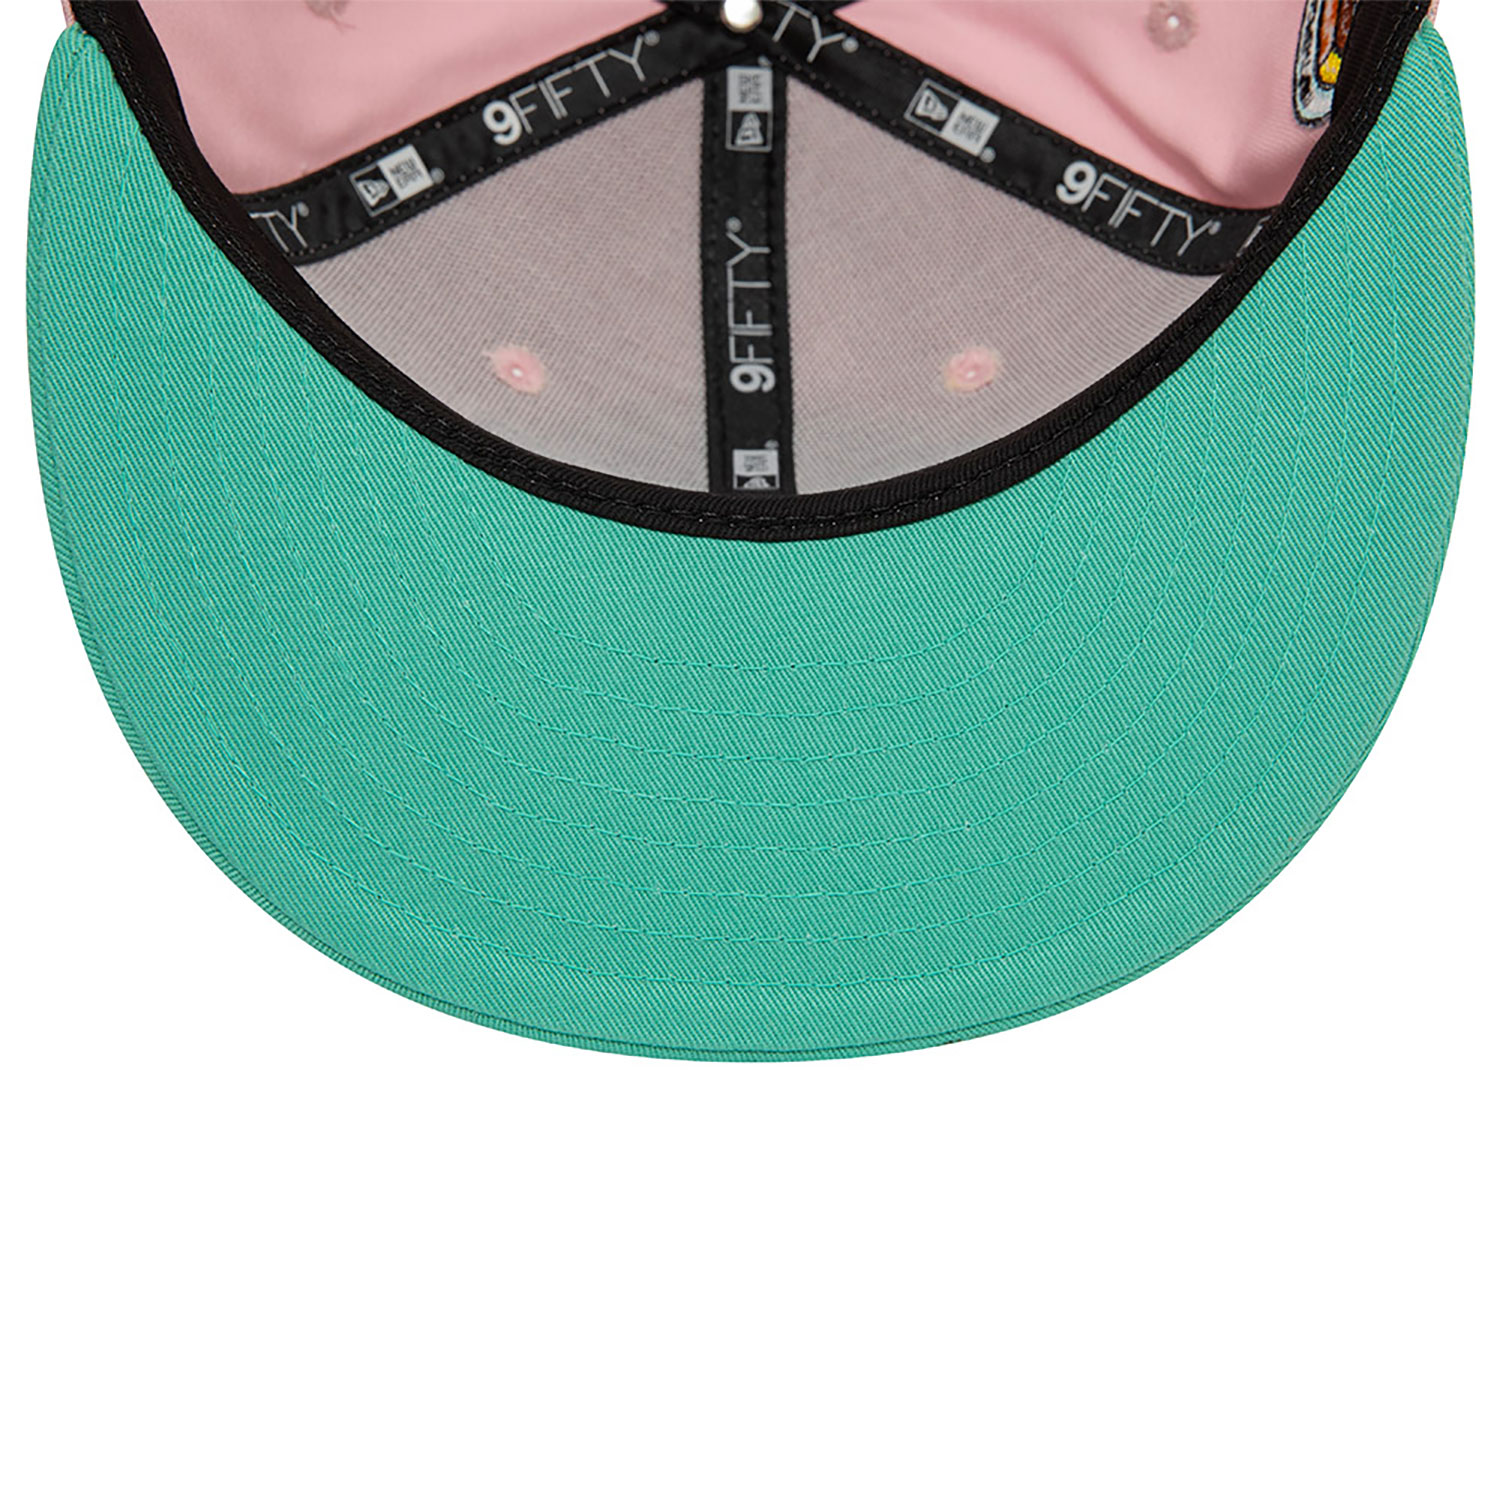 Rick And Morty Replacement Morty Pastel Pink 9FIFTY Snapback Cap